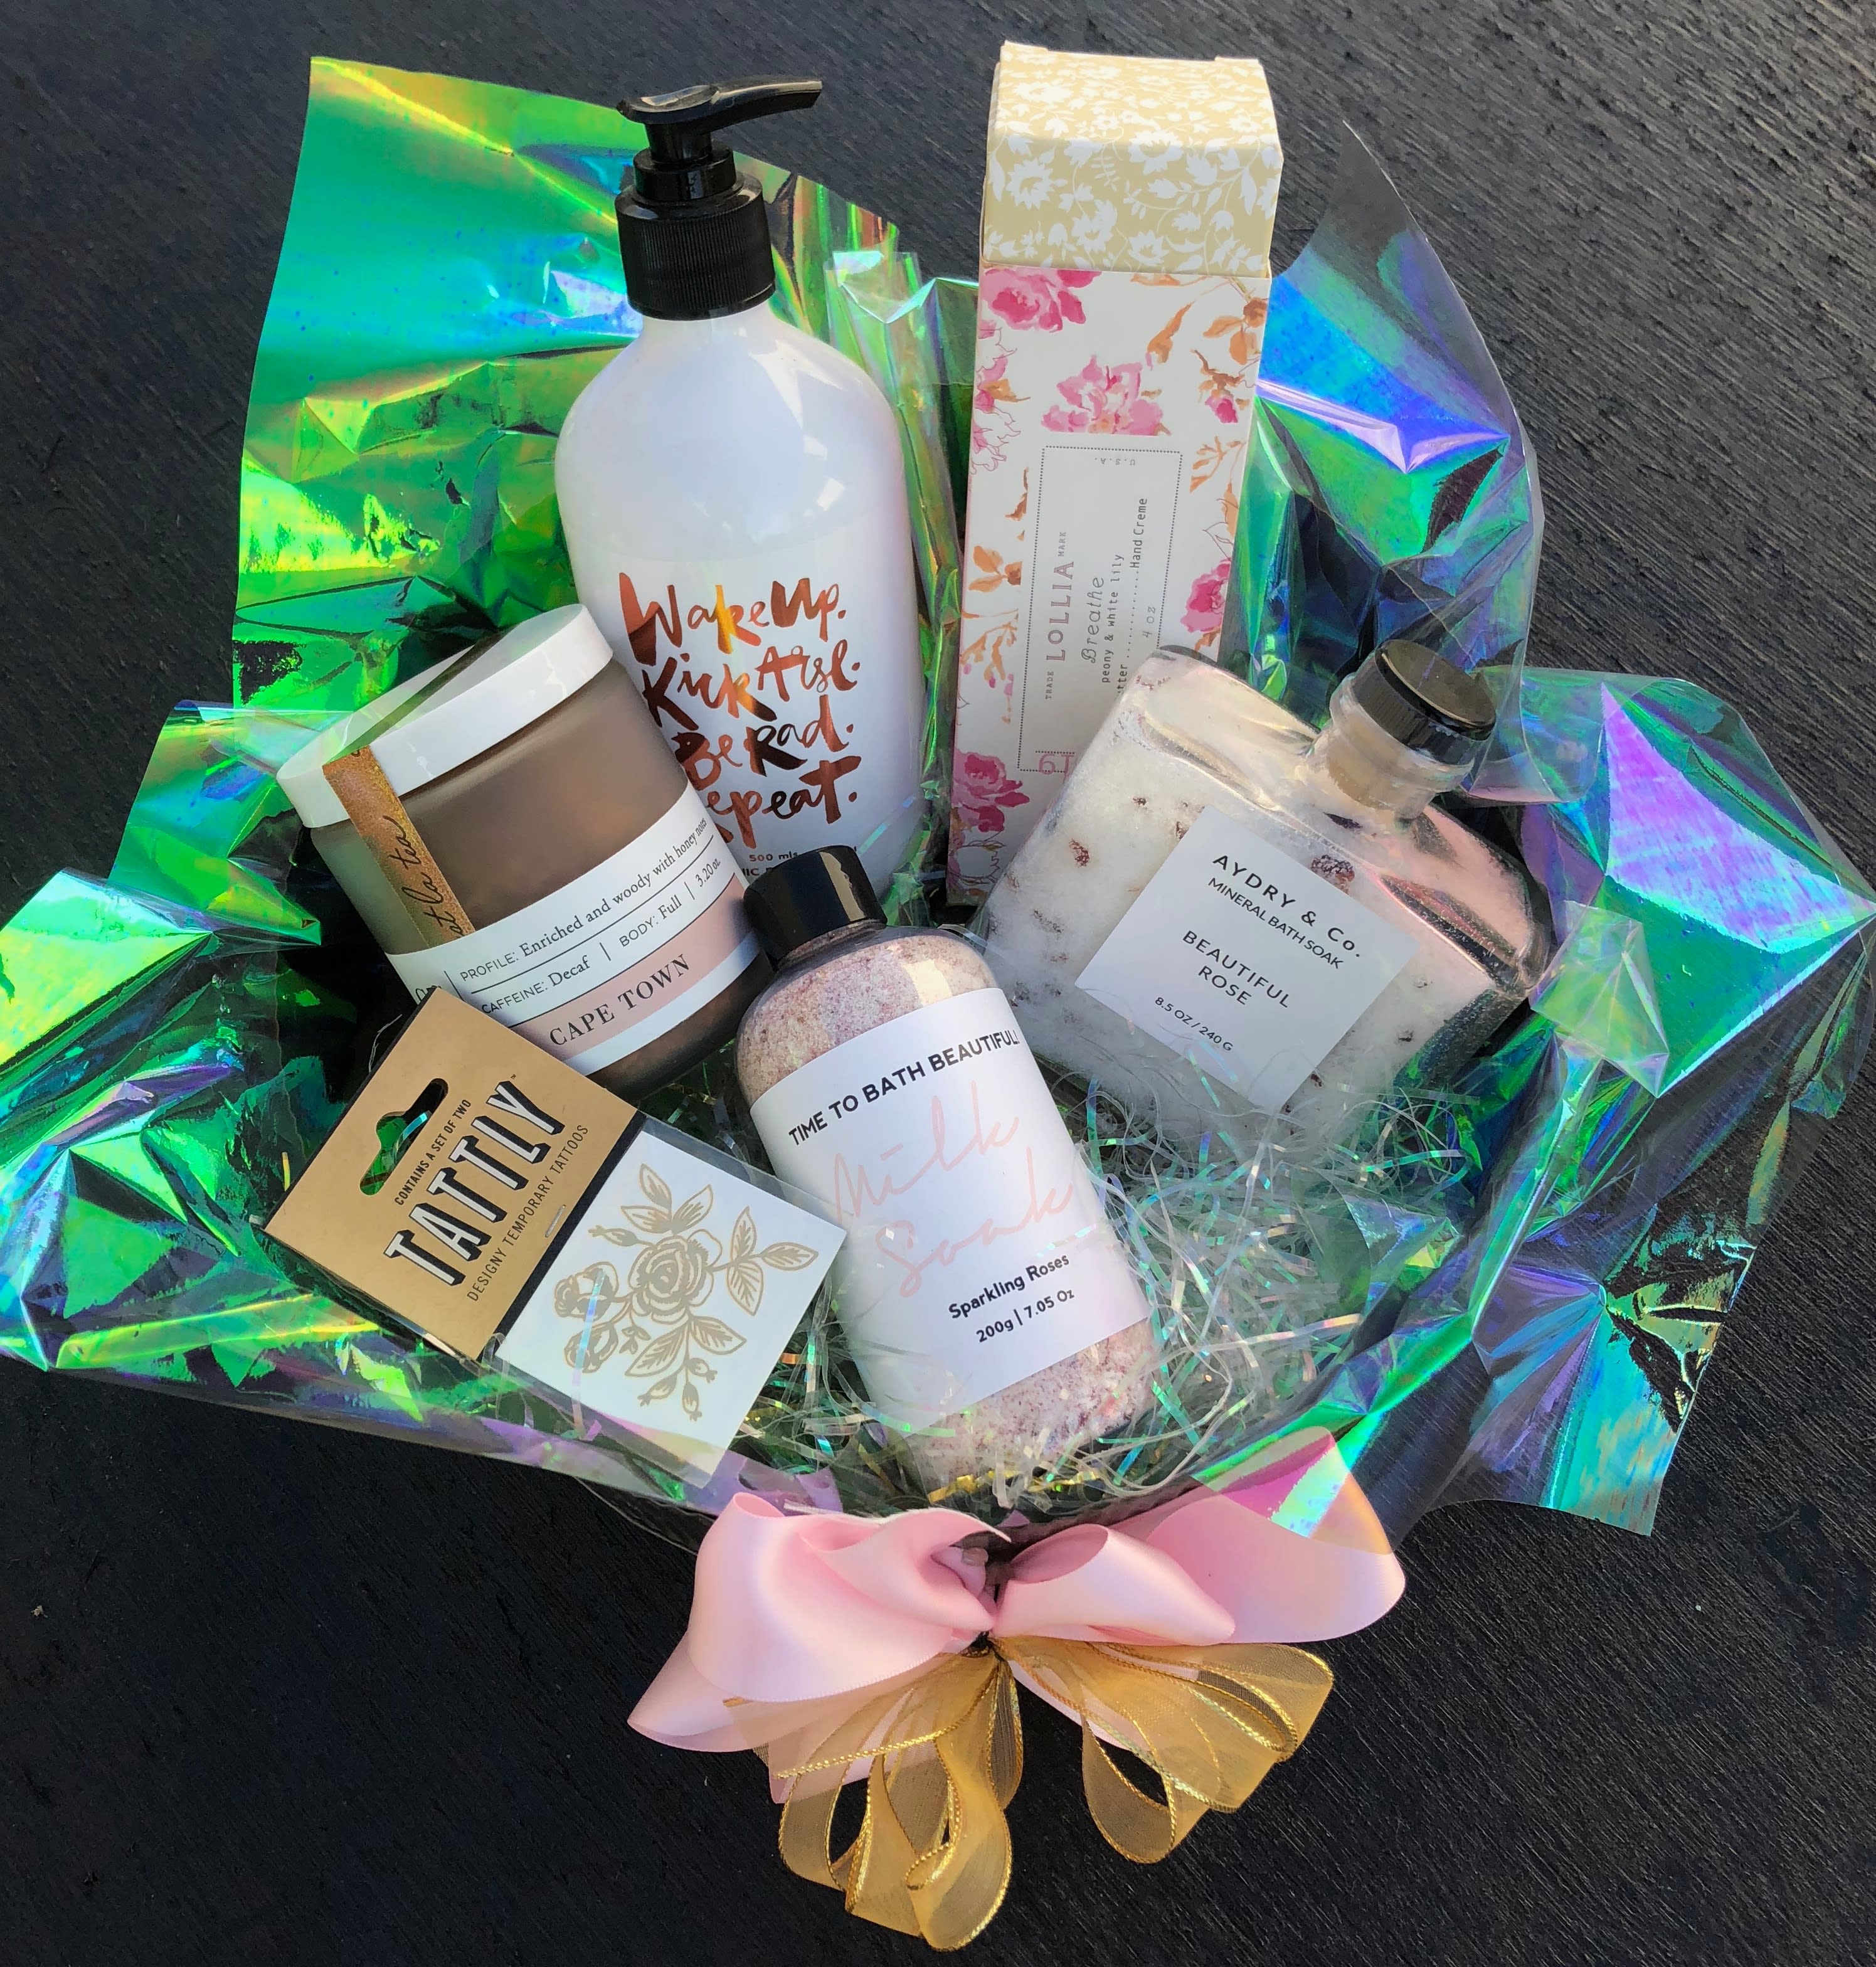 Floral Wellness Basket - The perfect gift basket for the Rose Gold Lover in your life! Filled with premium rosy body products which includes: Organic body wash by Babe, Sparkling Rose Milk Soak by Babe, Peony and White Lily hand creme by Lollia, Beautiful Rose bath soak by Aydry &amp; Co., Cape Town loose leaf tea by Teaspressa, and a gold temporary tattoo by Tattly. 